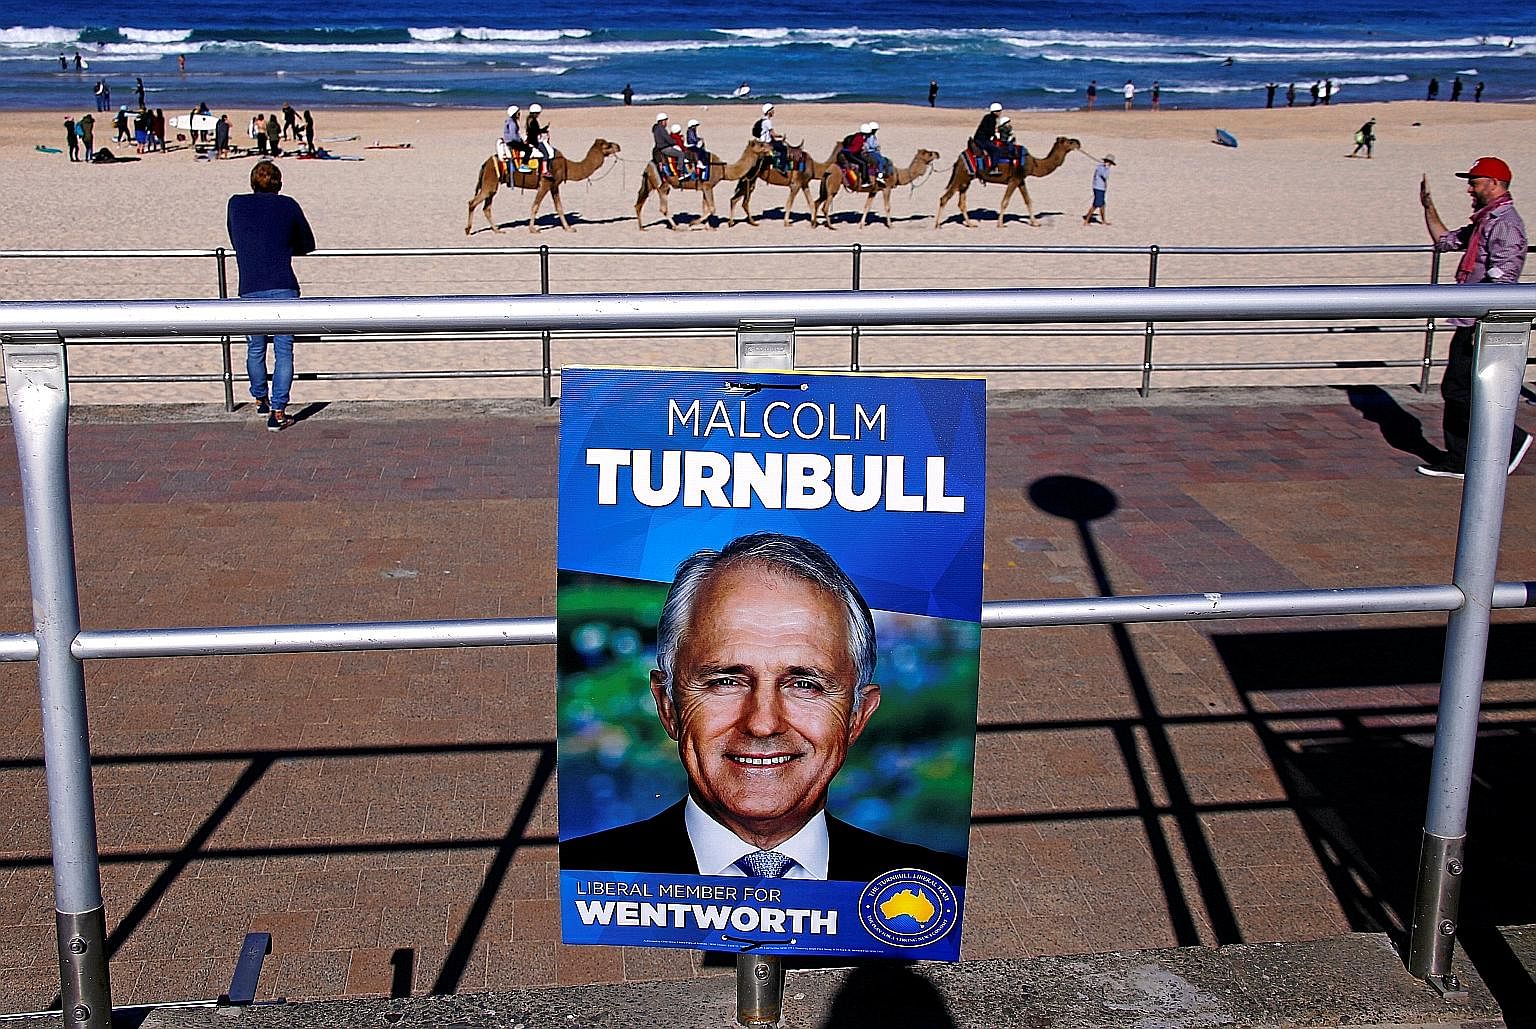 An election campaign poster of Australian Prime Minister Malcolm Turnbull against a backdrop of tourists riding camels along Bondi Beach in Sydney. Commentators have criticised Mr Turnbull's campaign, which appeared to lack energy and relied on a som